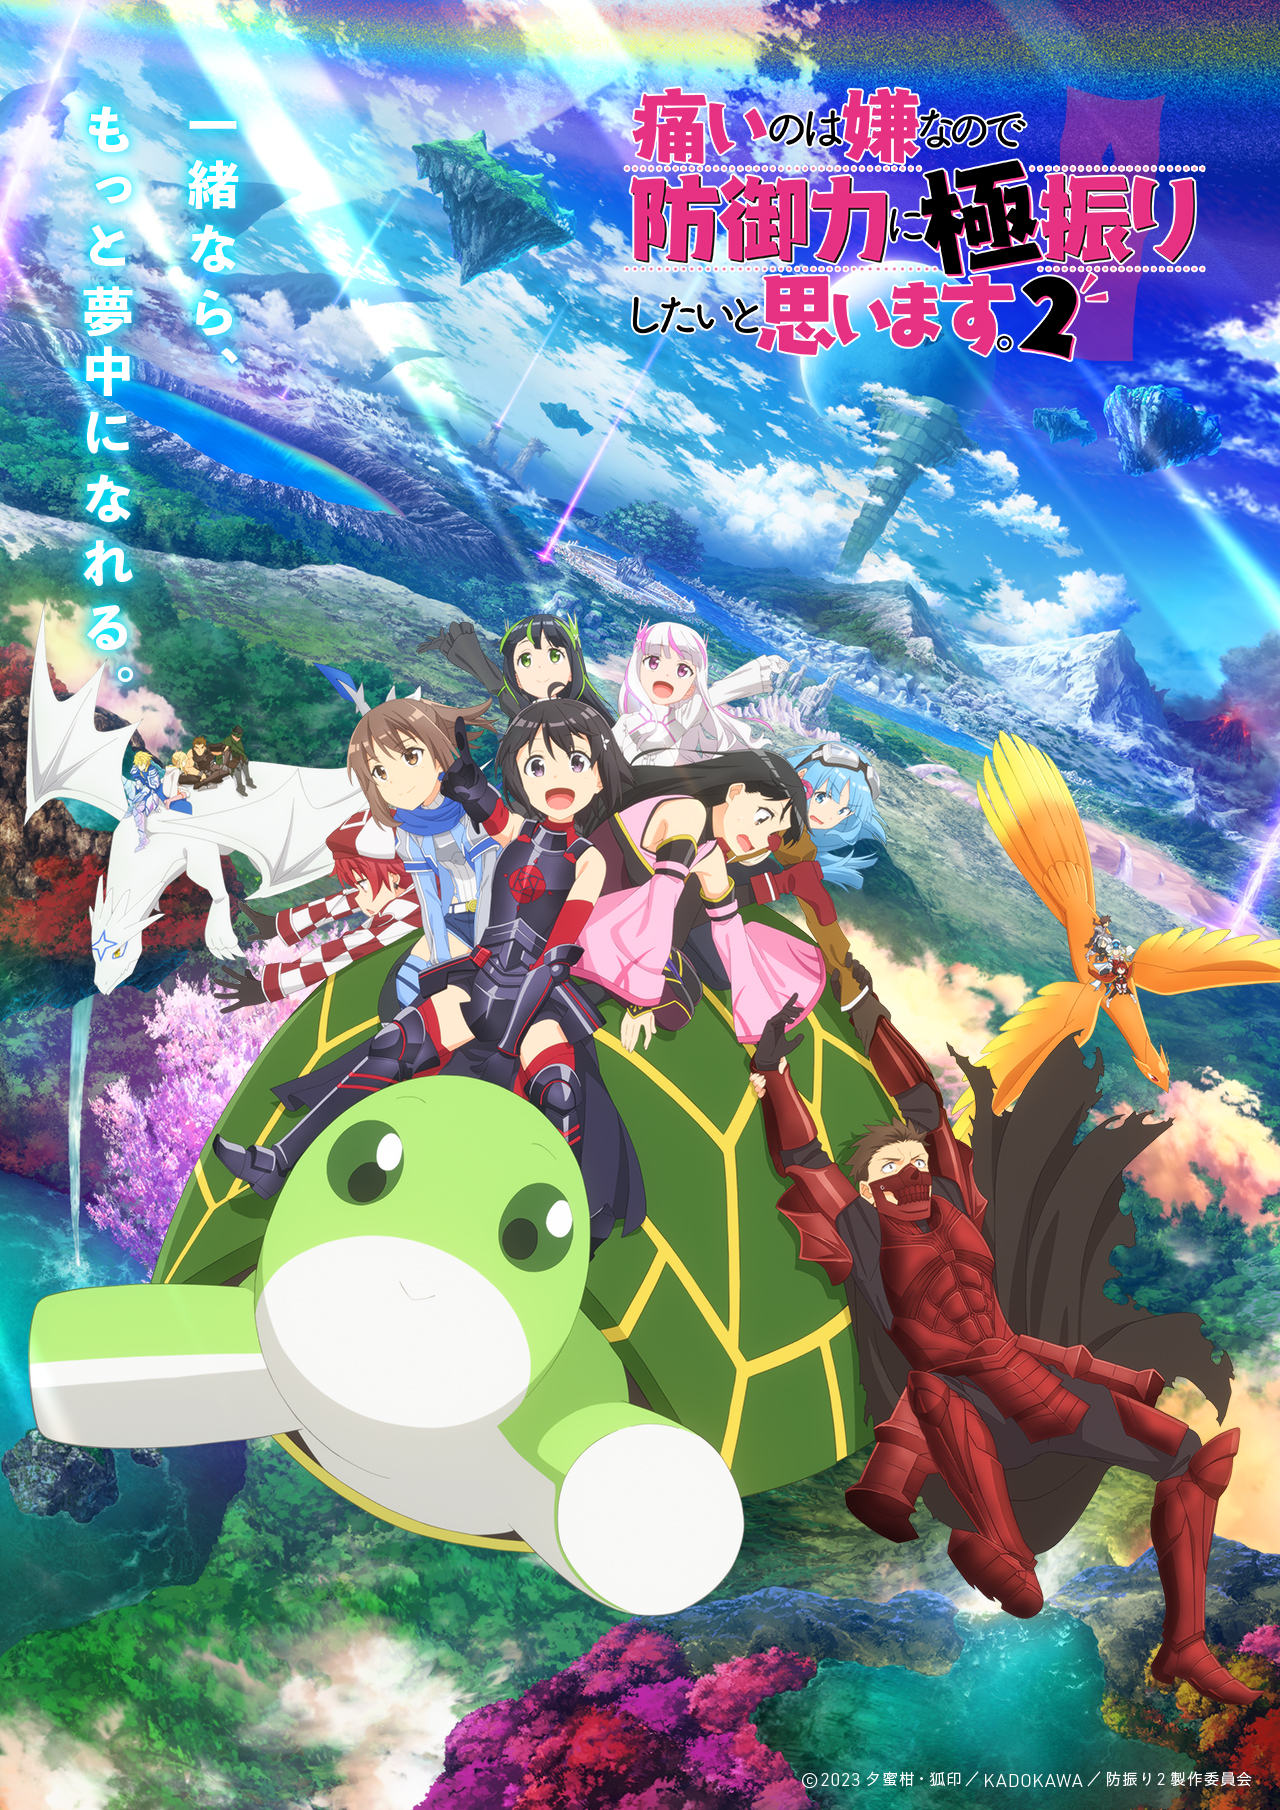 A key visual for the upcoming second season of the BOFURI: I Don't Want to Get Hurt, so I'll Max Out My Defense. TV anime featuring Maple and her friends soaring through the skies of their VRMMO fantasy world on the back of Maple's giant turtle pet.